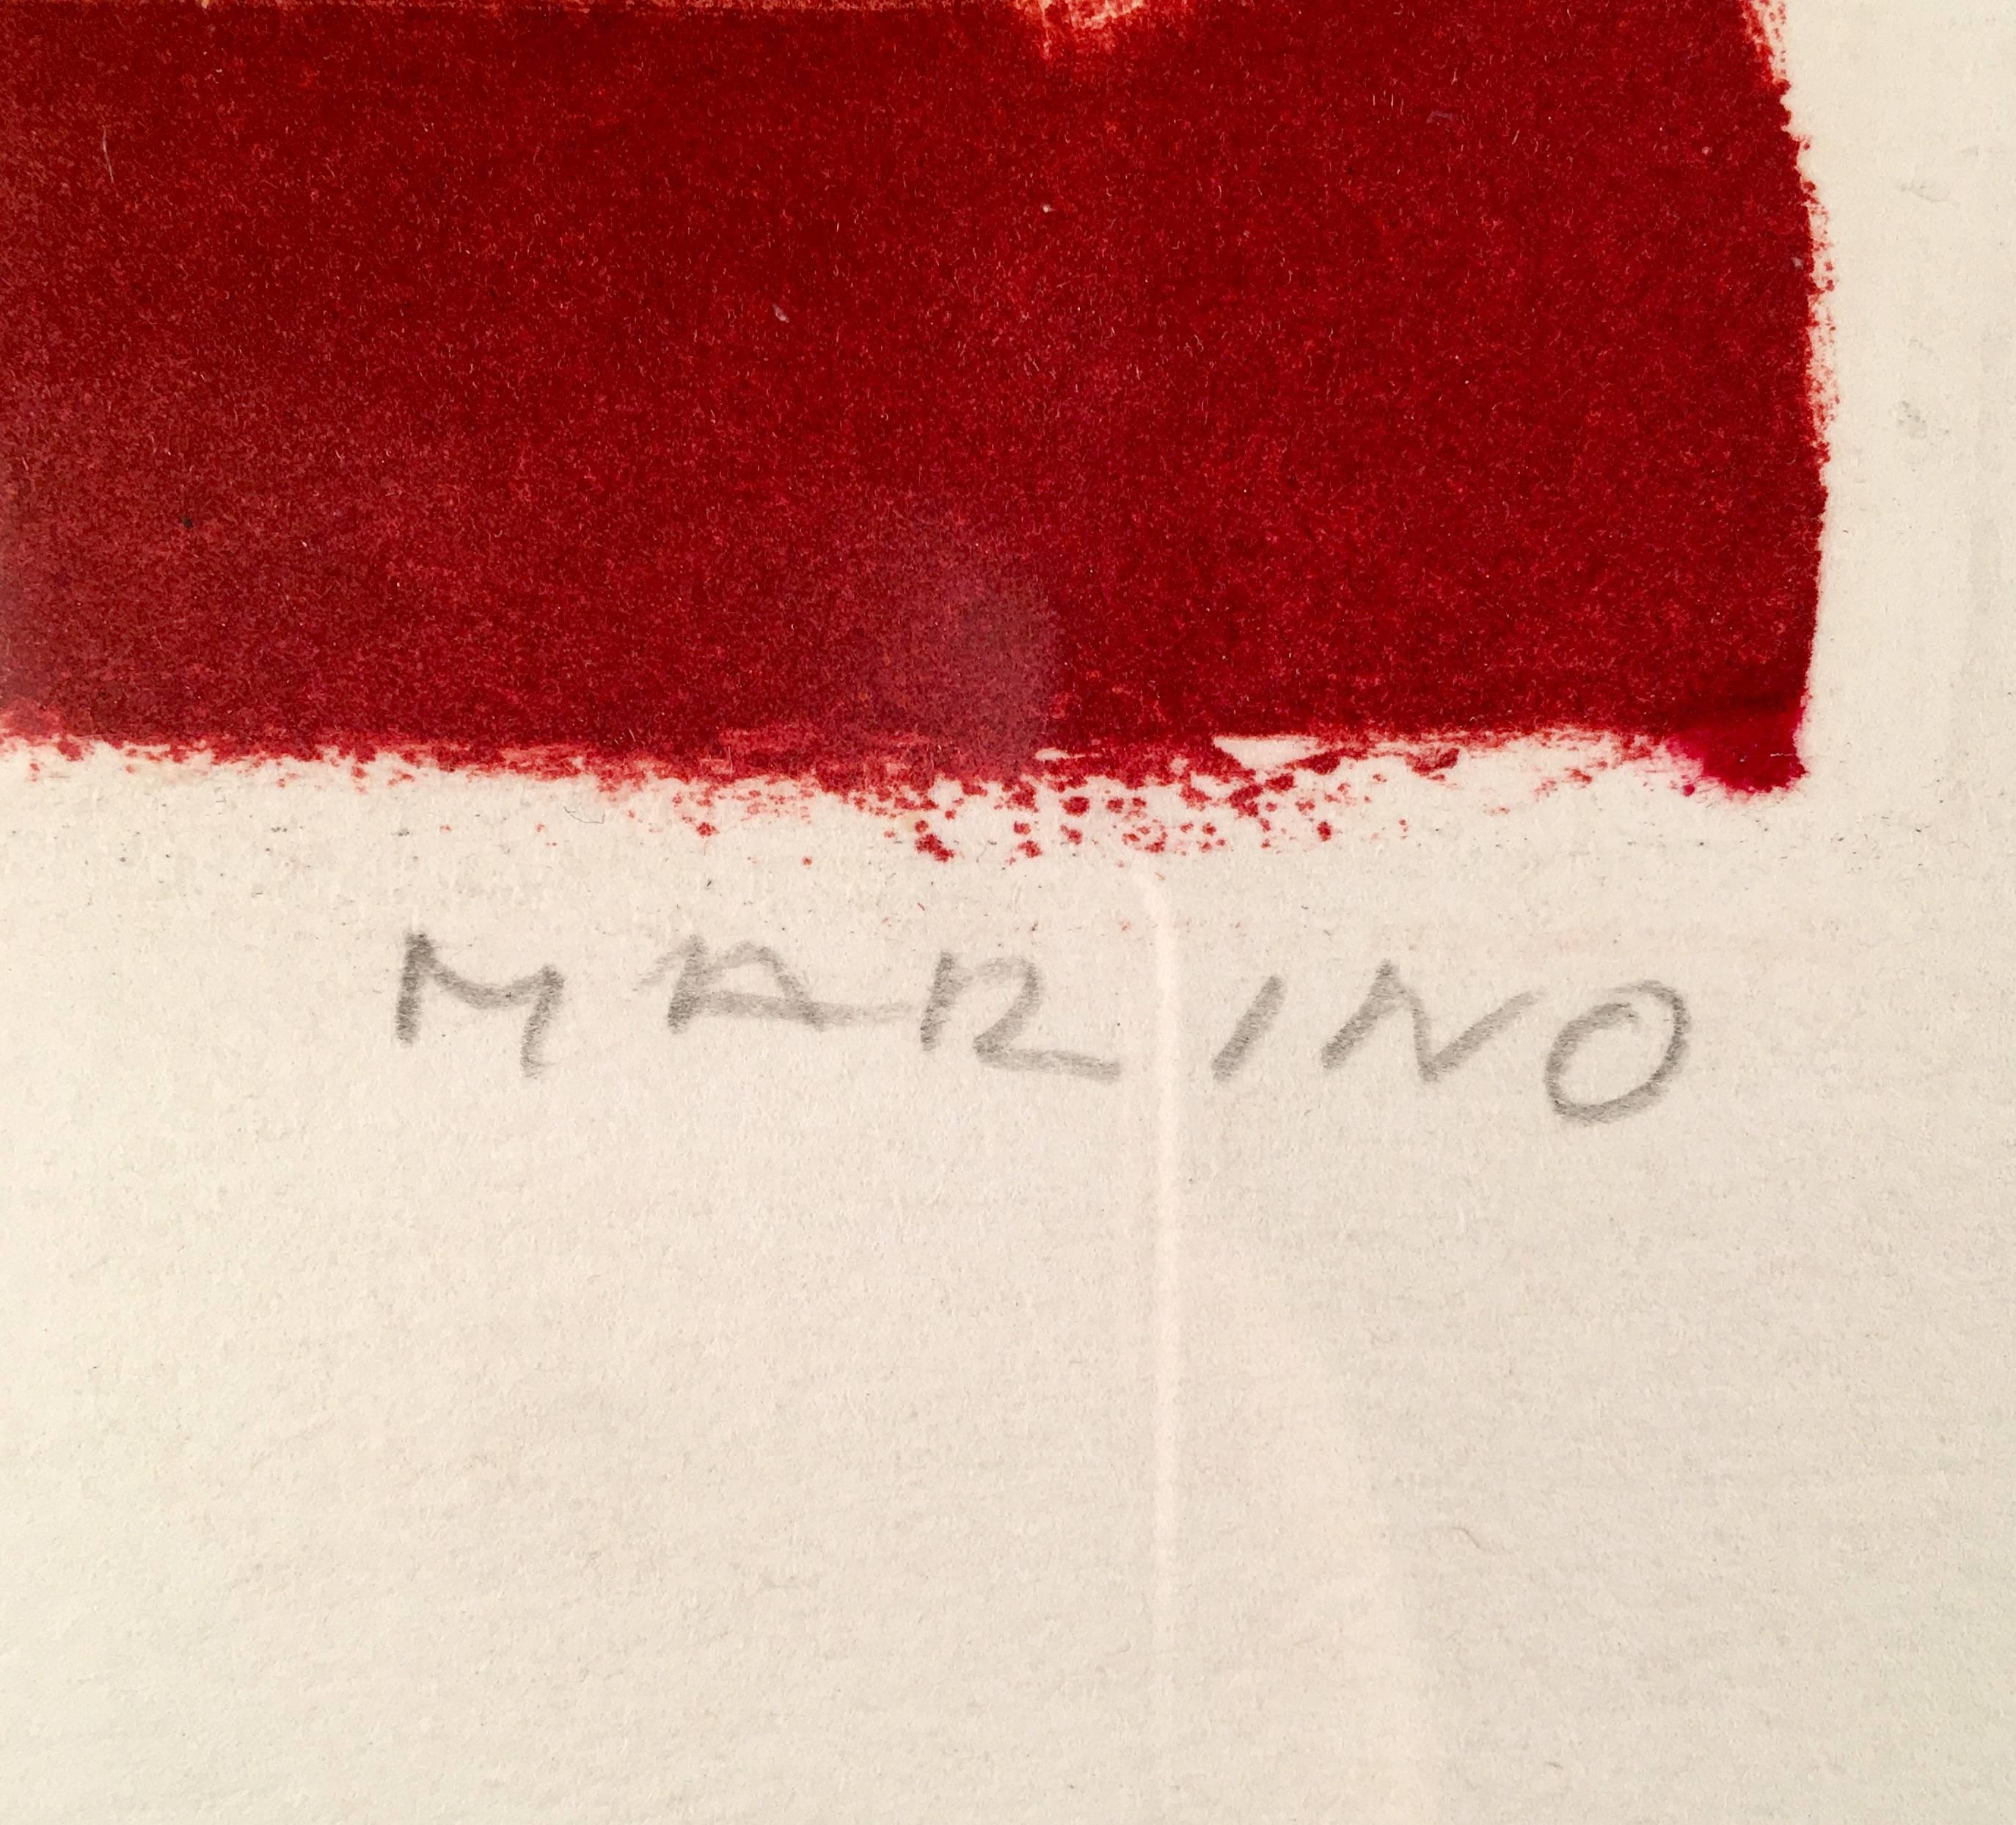 This piece is an original etching and aquatint by Marino Marini, created in 1977.  It is hand signed and marked 